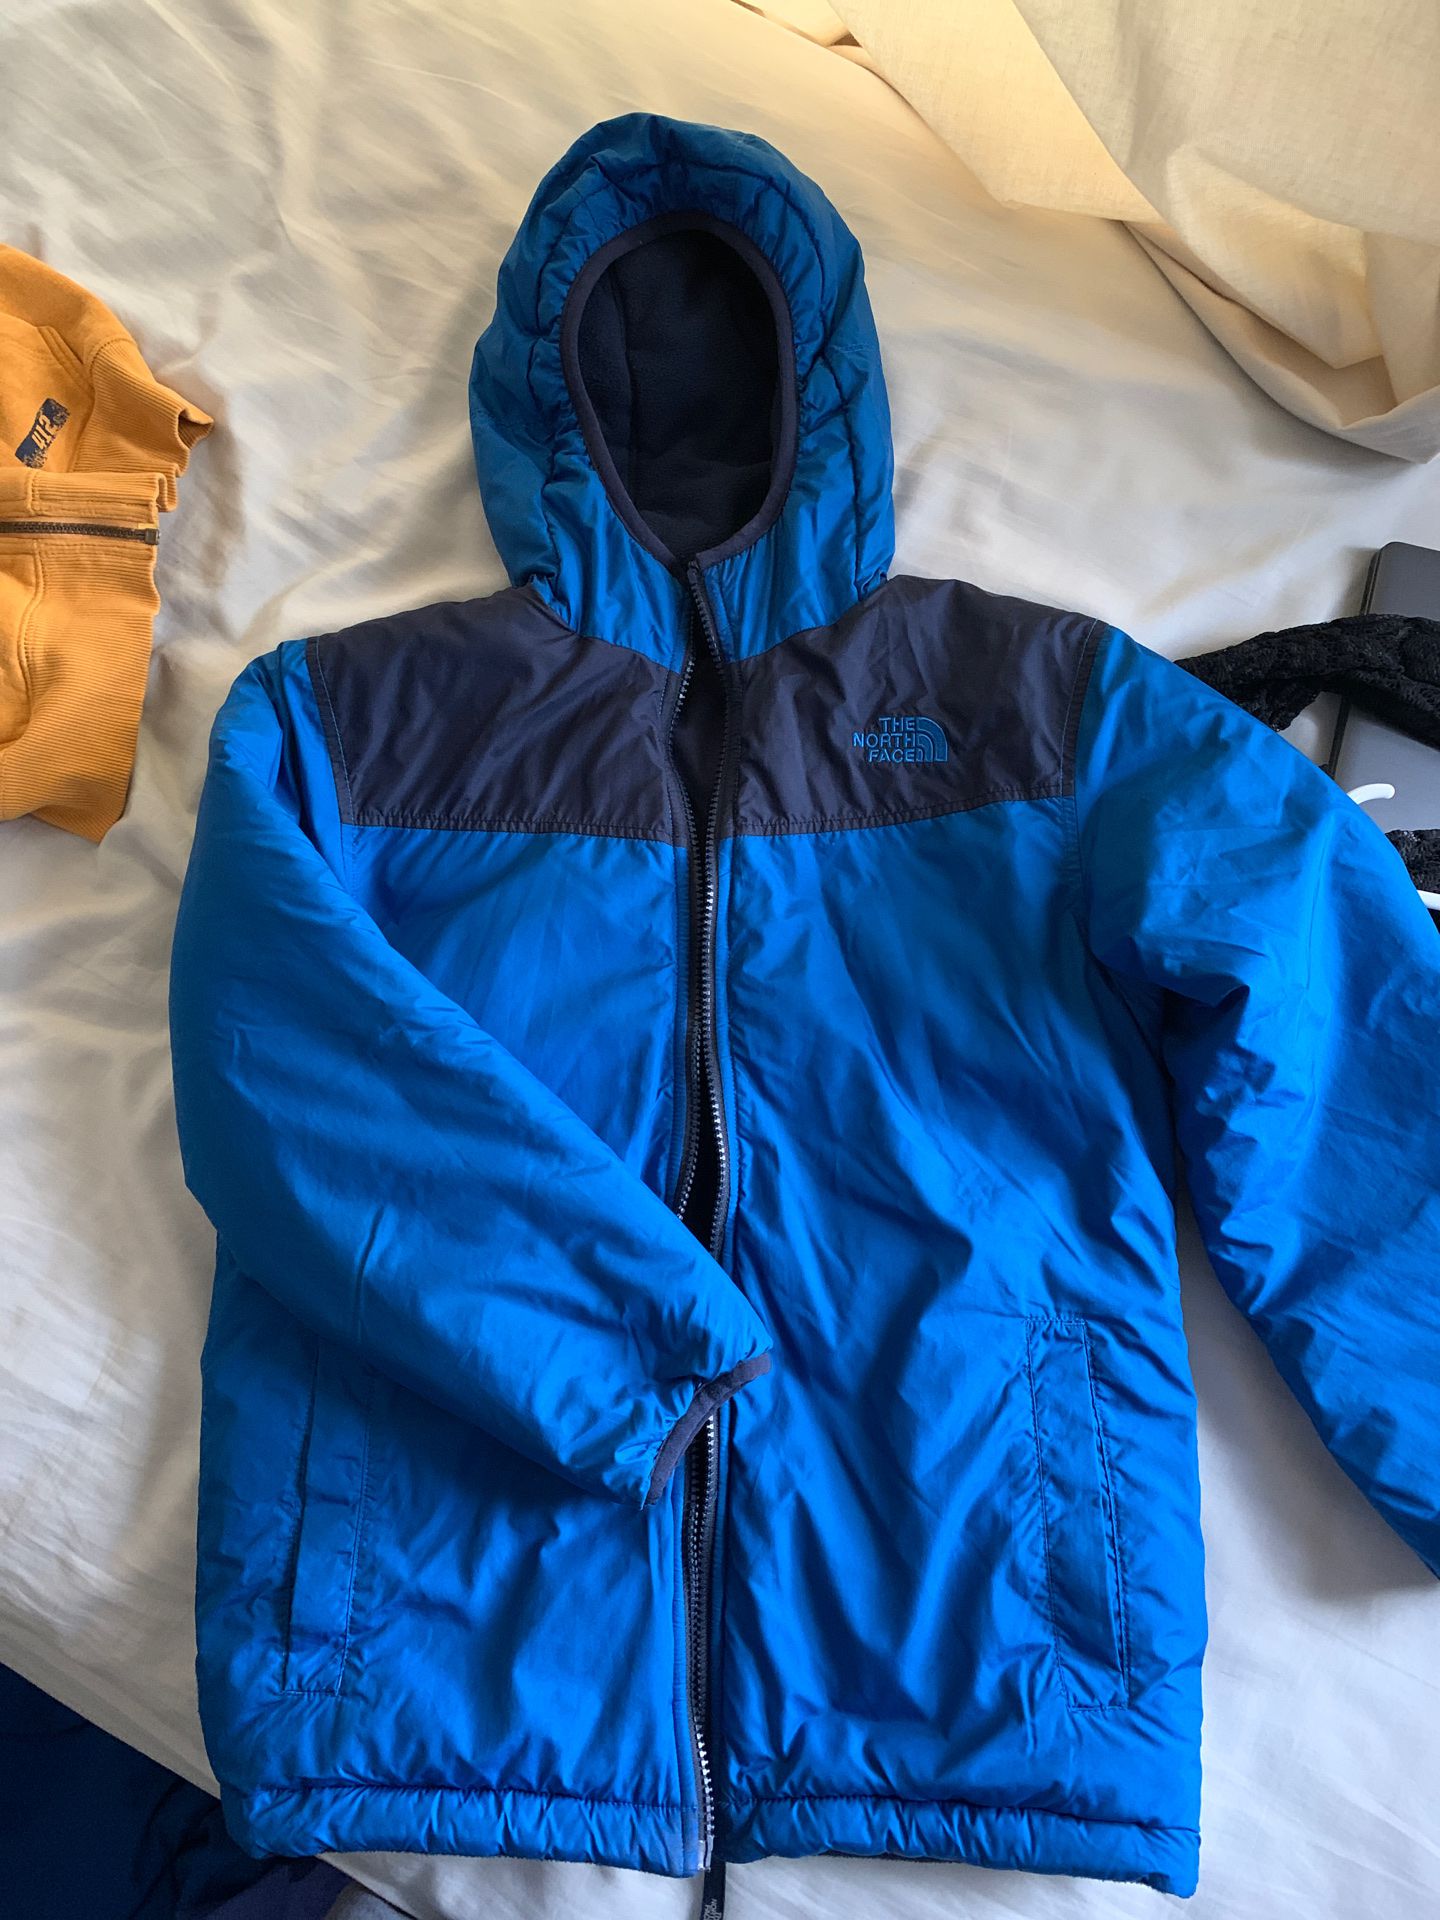 Youth North Face reversible coat size 8/10